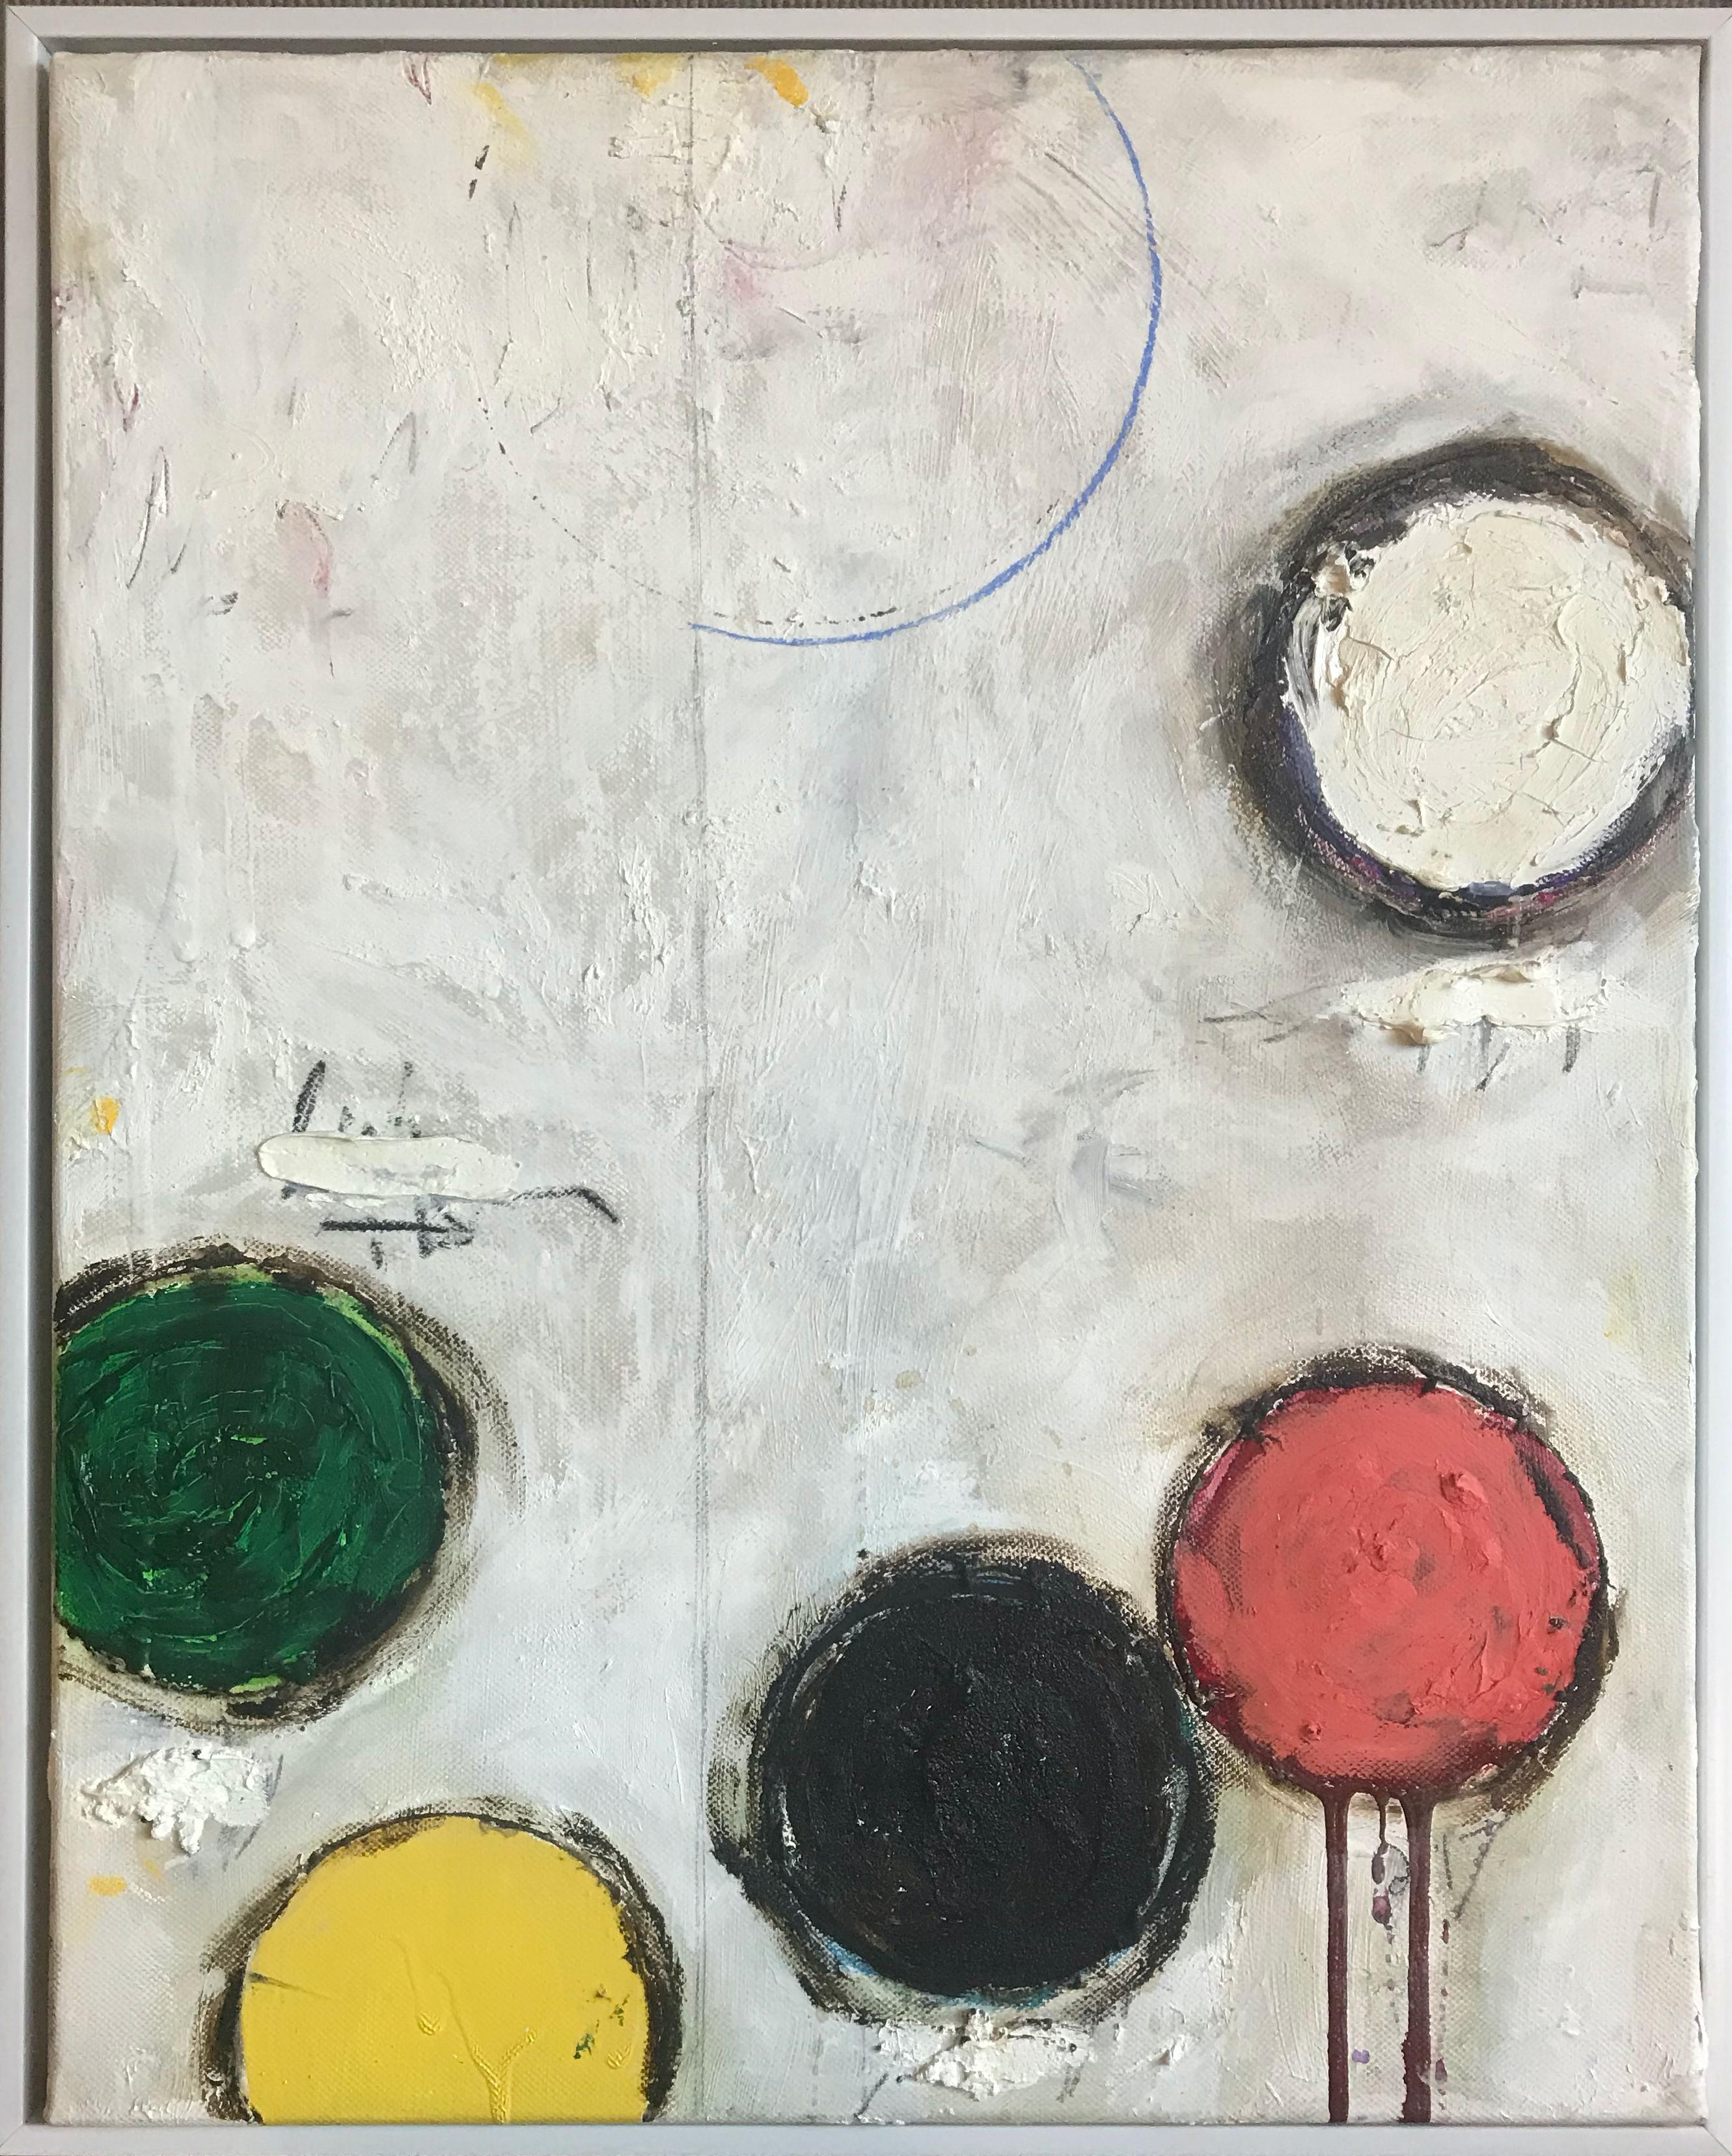 Primary Forms #13 - Painting by G. Campbell Lyman